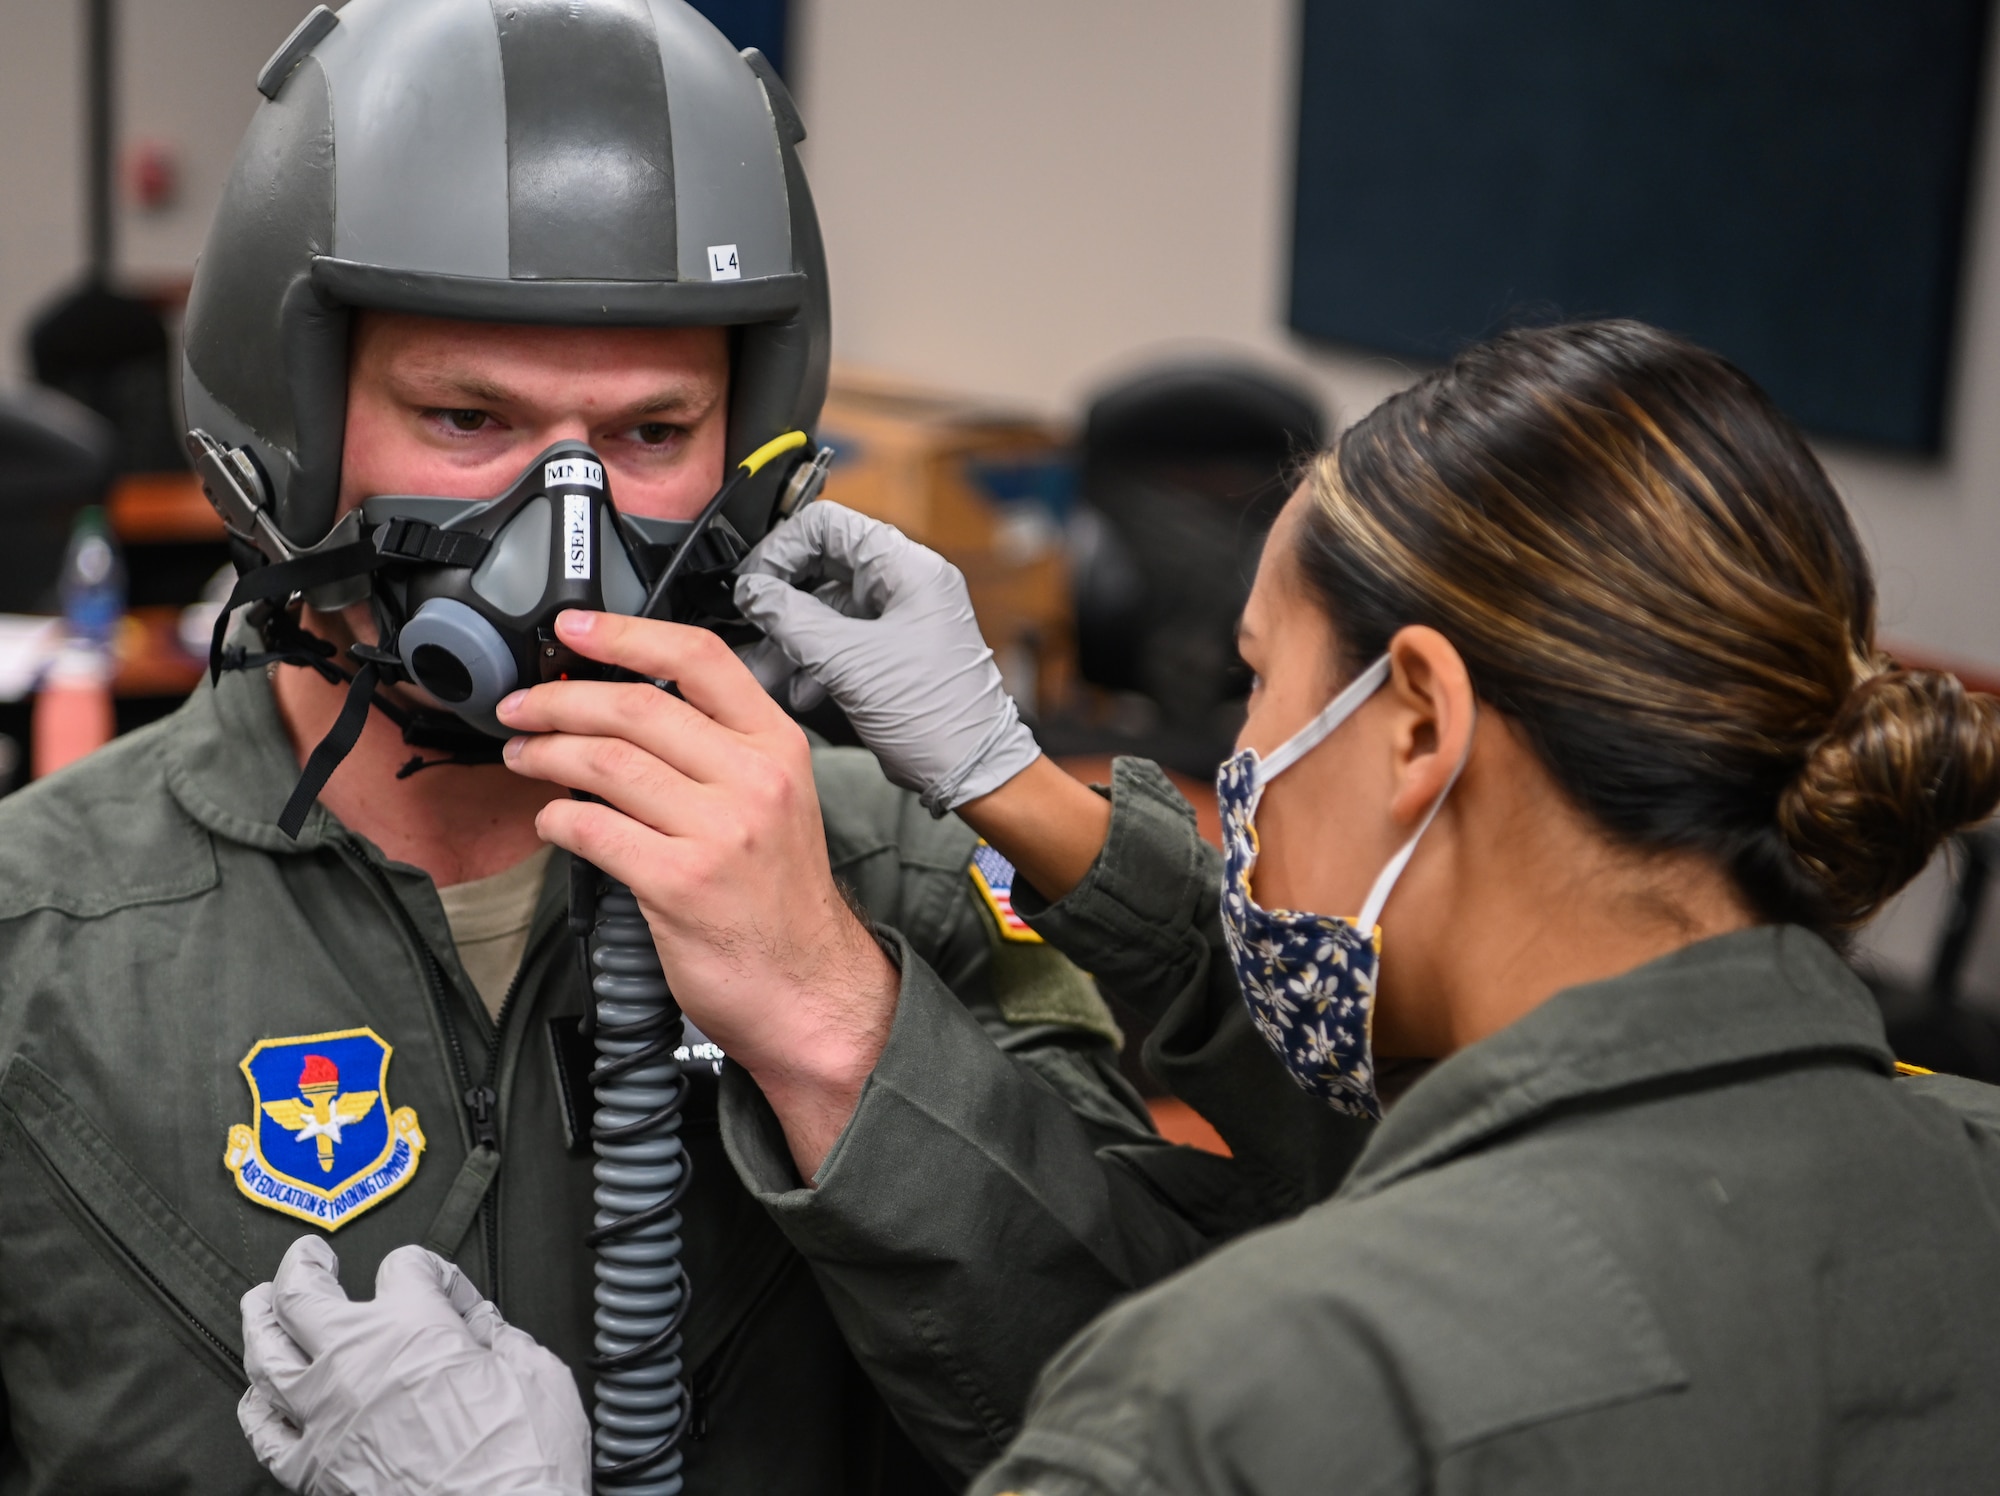 A student pilot assigned to the 23rd Flying Training Squadron at Fort Rucker, Alabama, tries on equipment, while an aerospace physiology specialist from the 14th Operational Medical Readiness Squadron makes sure the equipment fits correctly on August 21, 2020, at Columbus Air Force Base, Miss. Aerospace physiology specialists are responsible for teaching pilots and aircrews the essential skills they need to handle in-flight emergencies through various training such as aircraft pressurization, night vision, emergency first aid, oxygen equipment, physiological effects of altitude and emergency escape from aircraft. (U.S. Air Force photo by Airman 1st Class Davis Donaldson)